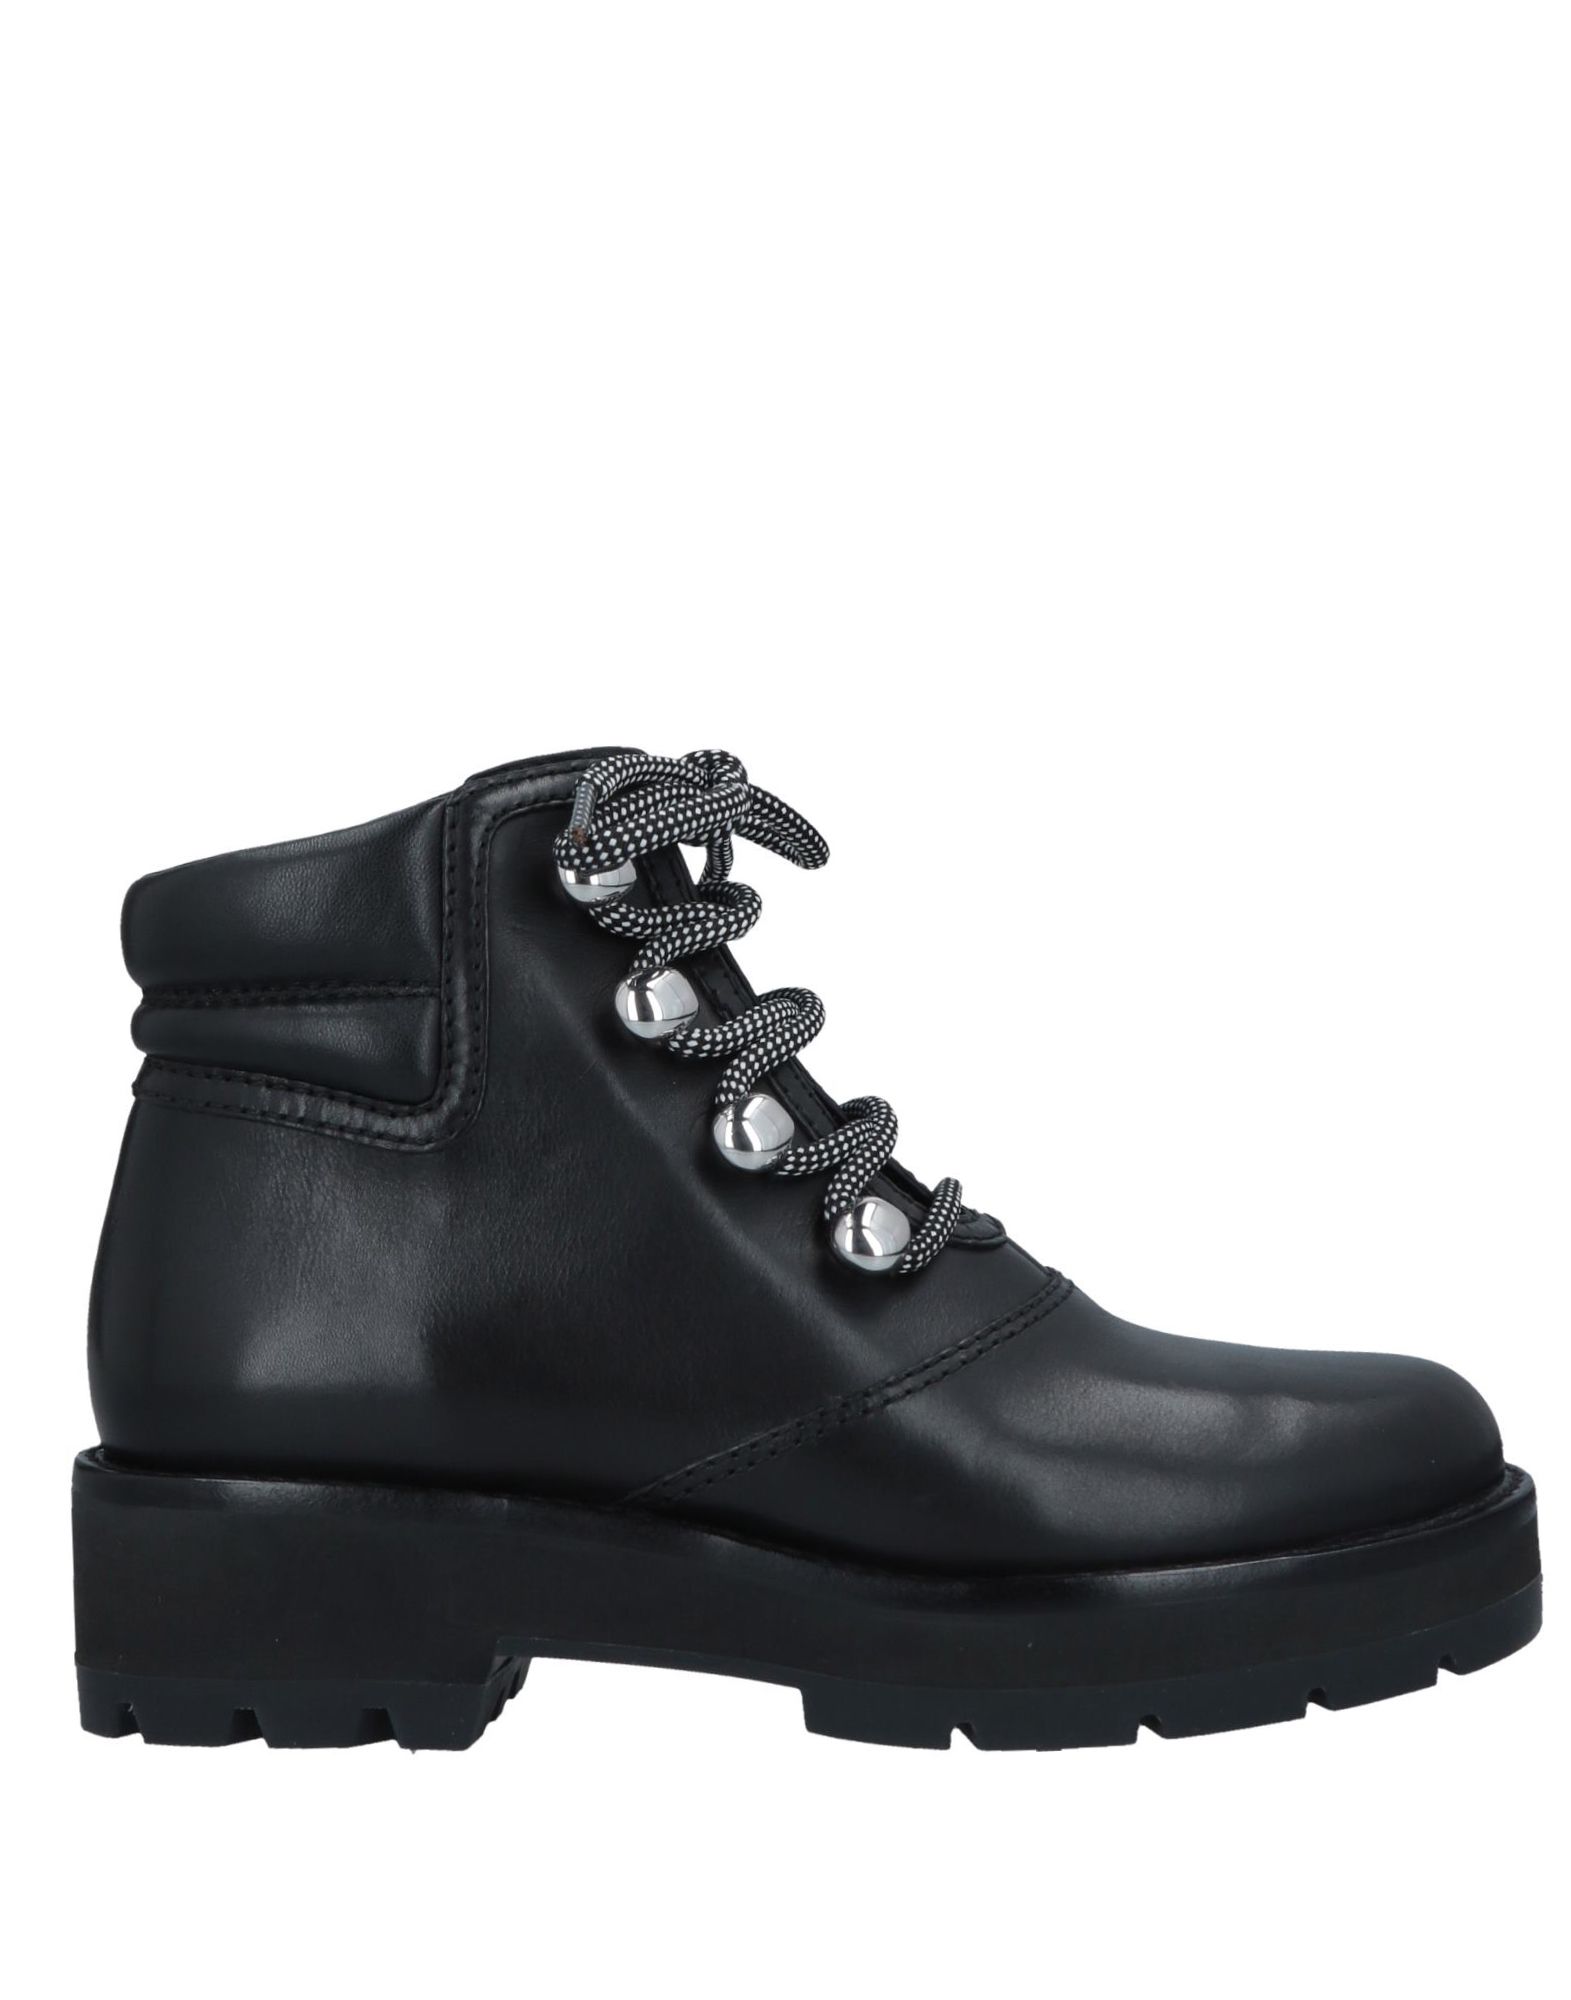 3.1 PHILLIP LIM / フィリップ リム ANKLE BOOTS,11680523EU 13